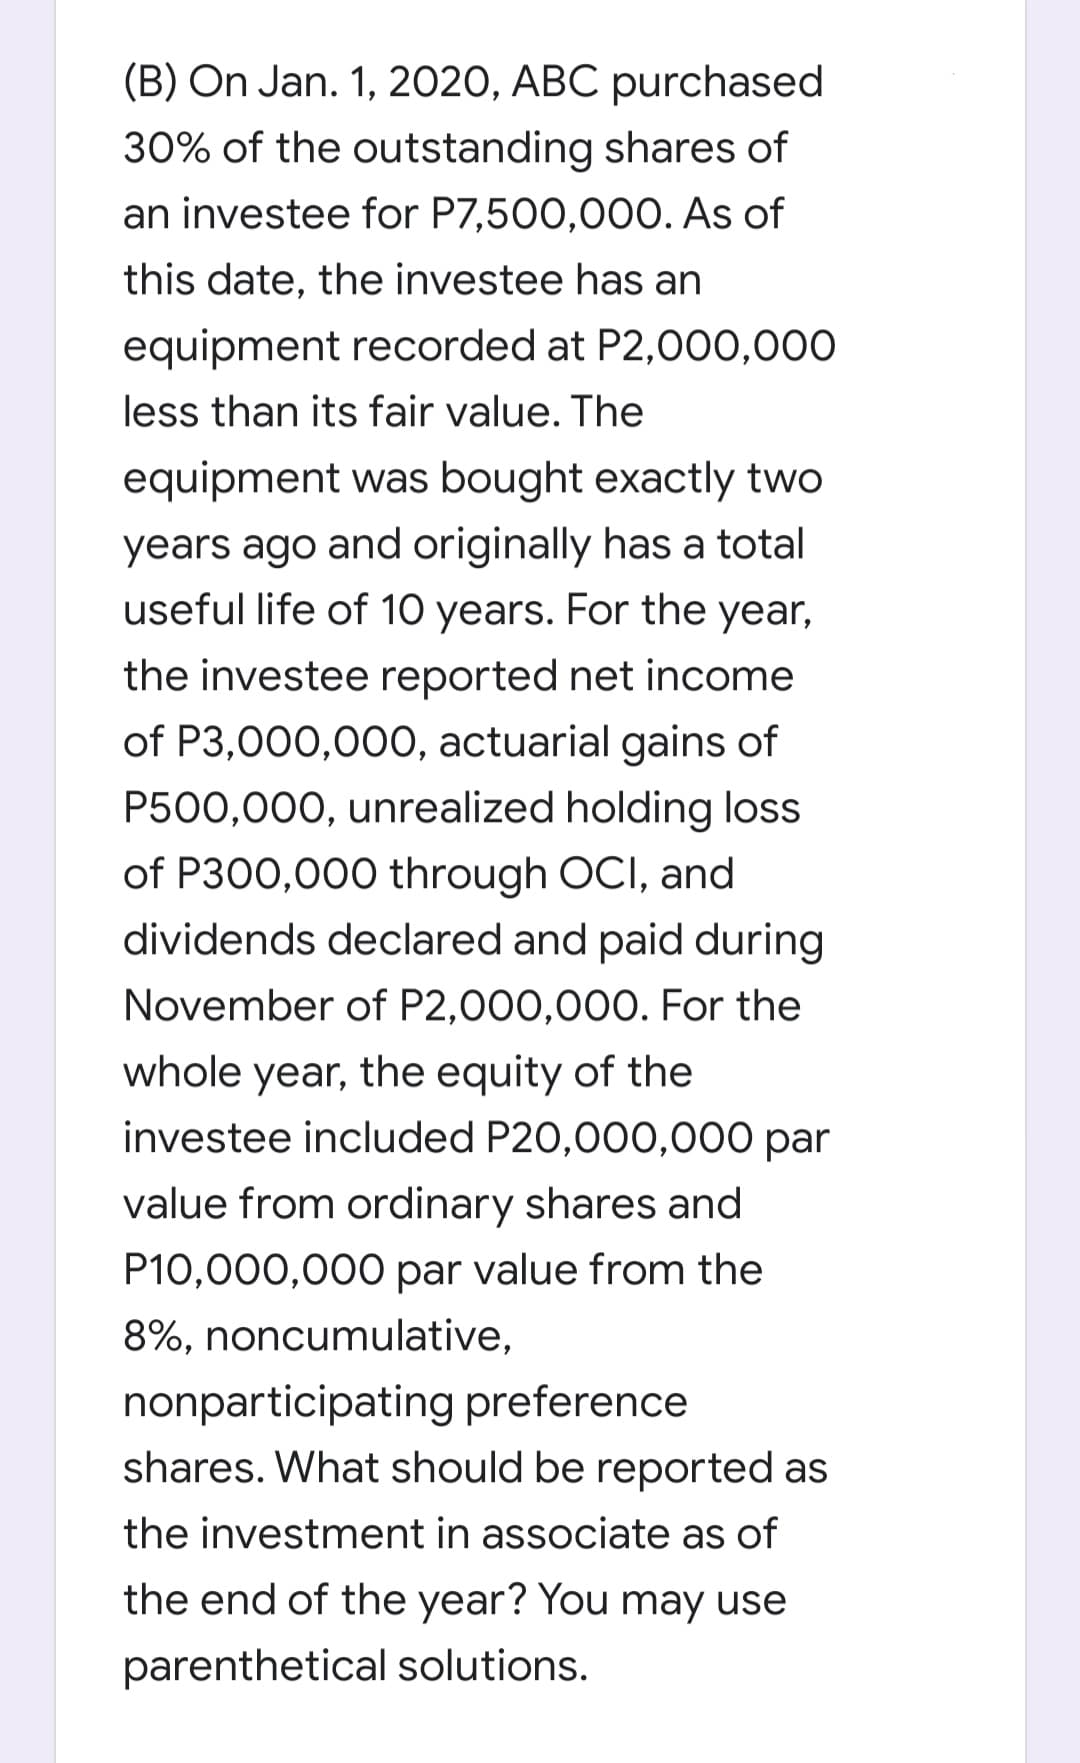 (B) On Jan. 1, 2020, ABC purchased
30% of the outstanding shares of
an investee for P7,500,000. As of
this date, the investee has an
equipment recorded at P2,000,000
less than its fair value. The
equipment was bought exactly two
years ago and originally has a total
useful life of 10 years. For the year,
the investee reported net income
of P3,000,00O, actuarial gains of
P500,000, unrealized holding loss
of P300,000 through OCI, and
dividends declared and paid during
November of P2,000,000. For the
whole year, the equity of the
investee included P20,000,000 par
value from ordinary shares and
P10,000,000 par value from the
8%, noncumulative,
nonparticipating preference
shares. What should be reported as
the investment in associate as of
the end of the year? You may use
parenthetical solutions.
